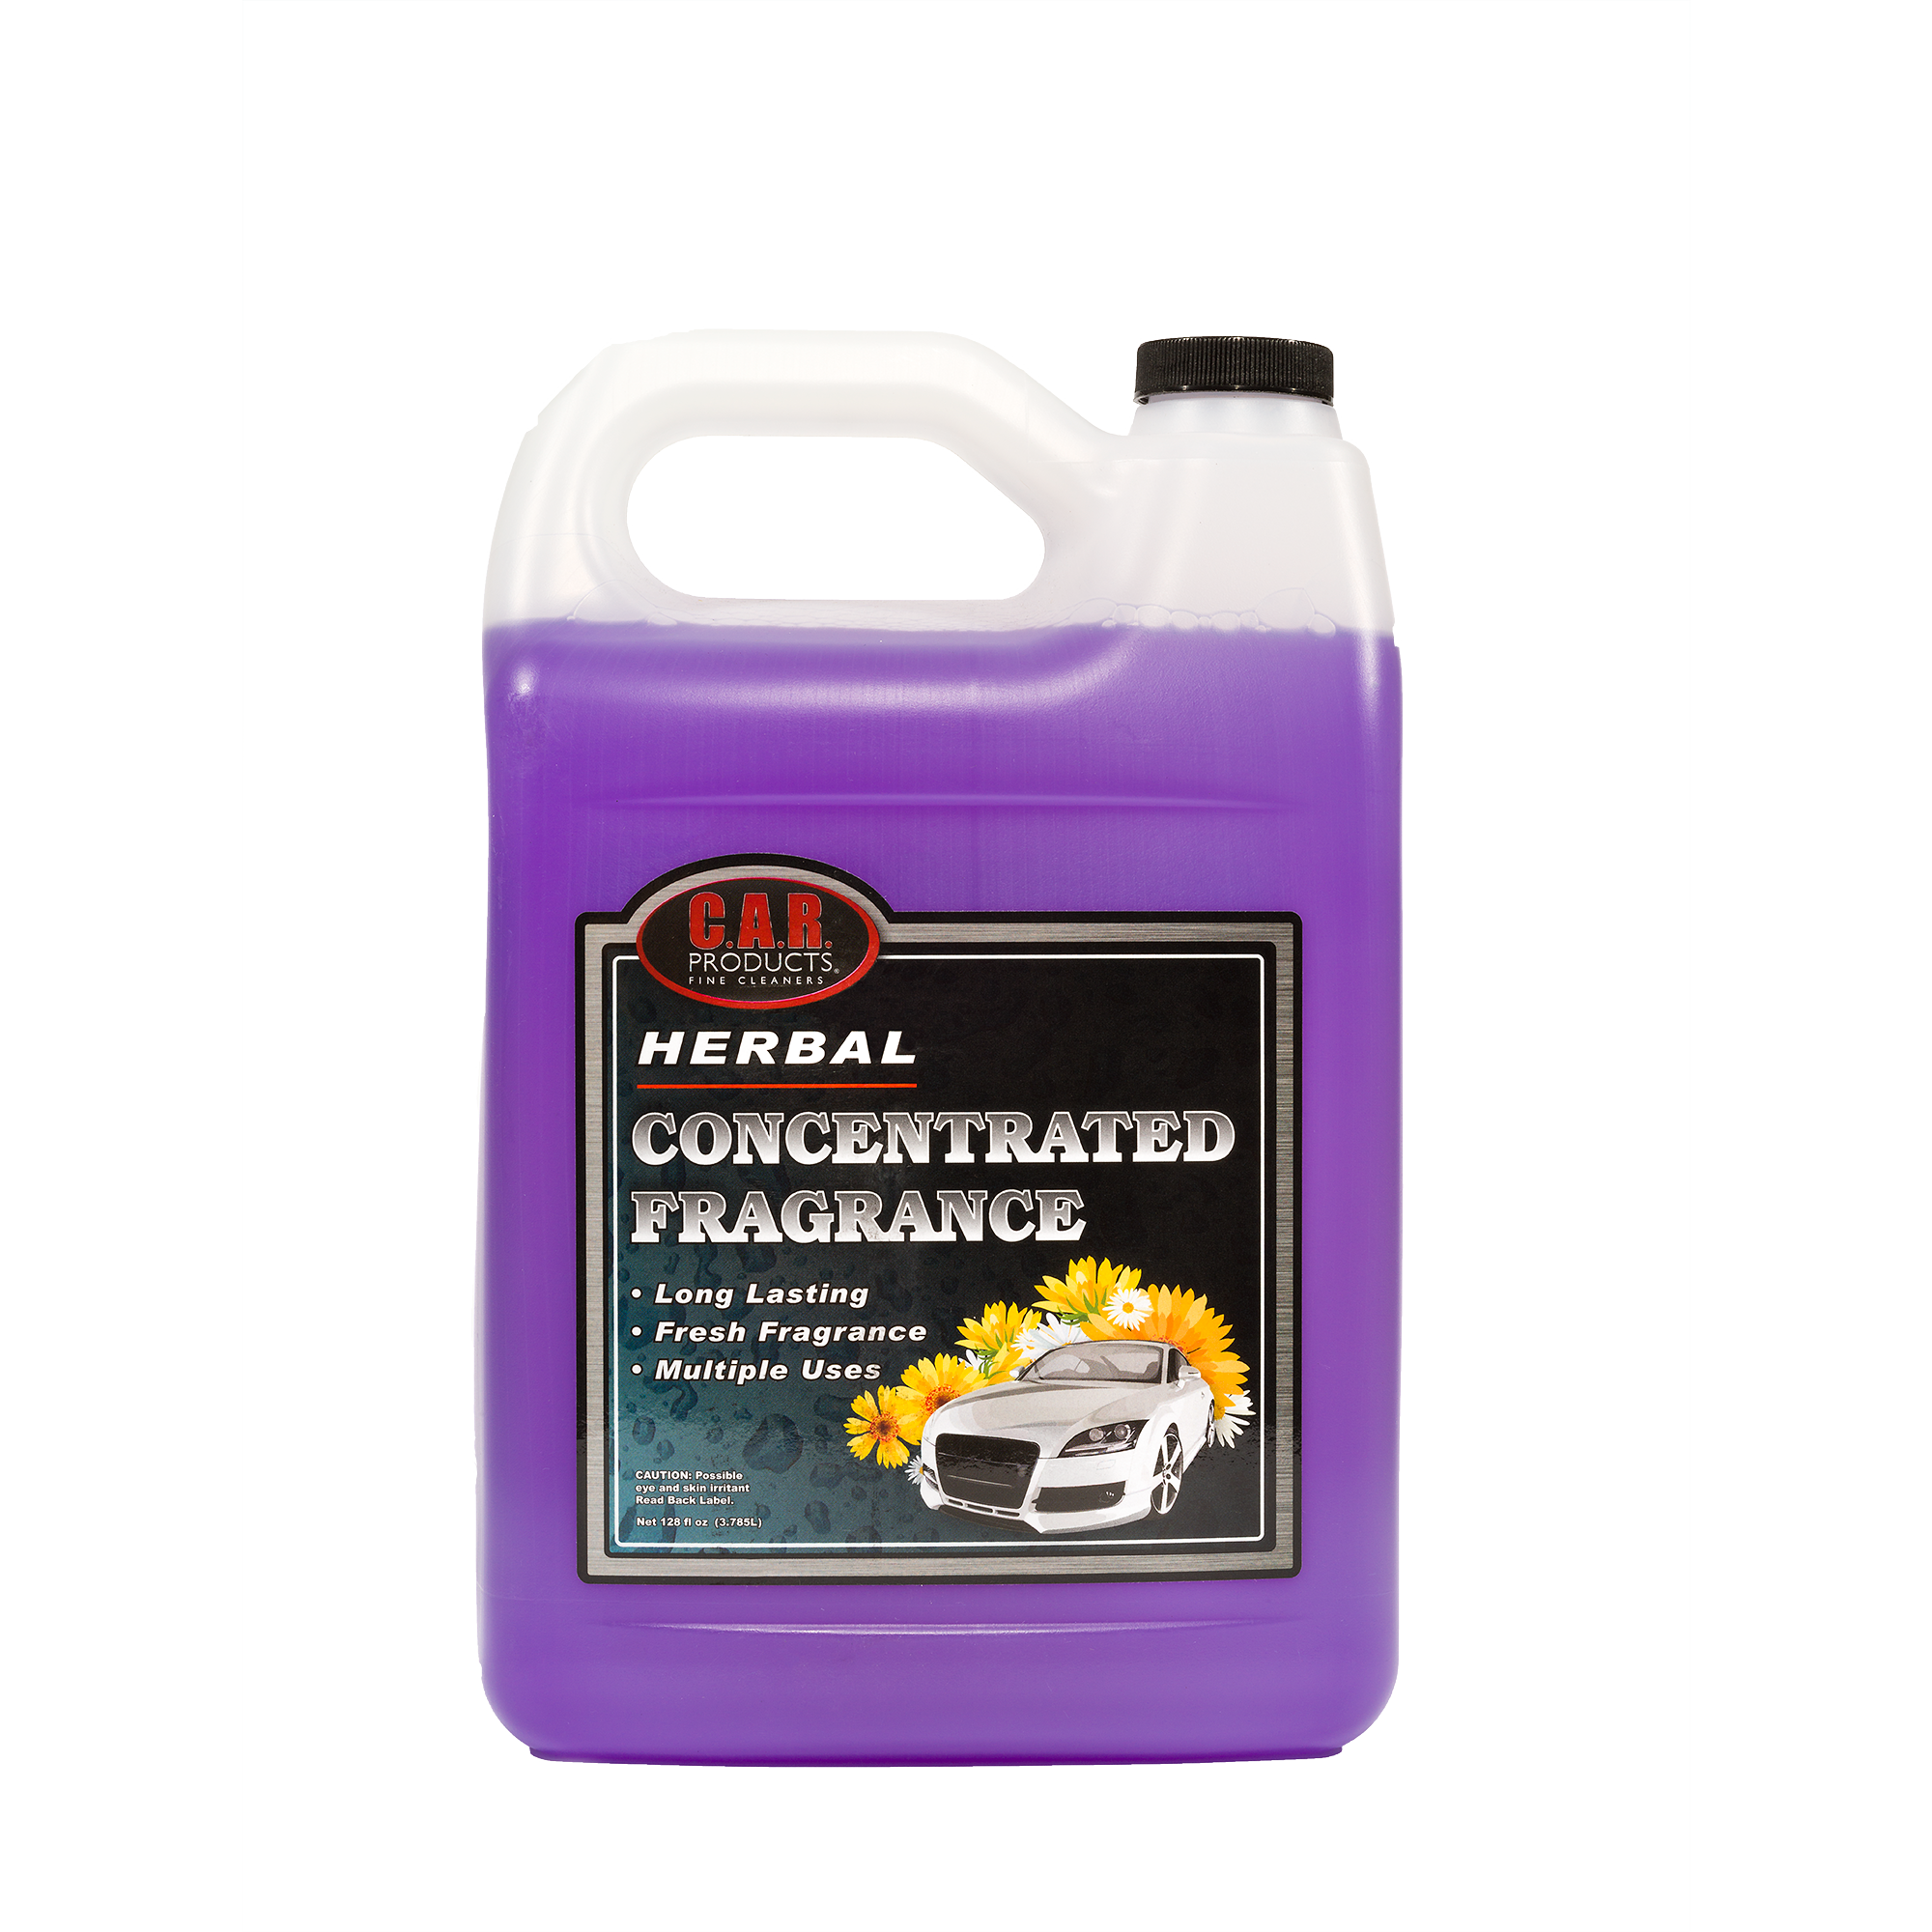 XCP CAR-40201 CAR Products Herbal Concentrated Fragrance (1 gal)